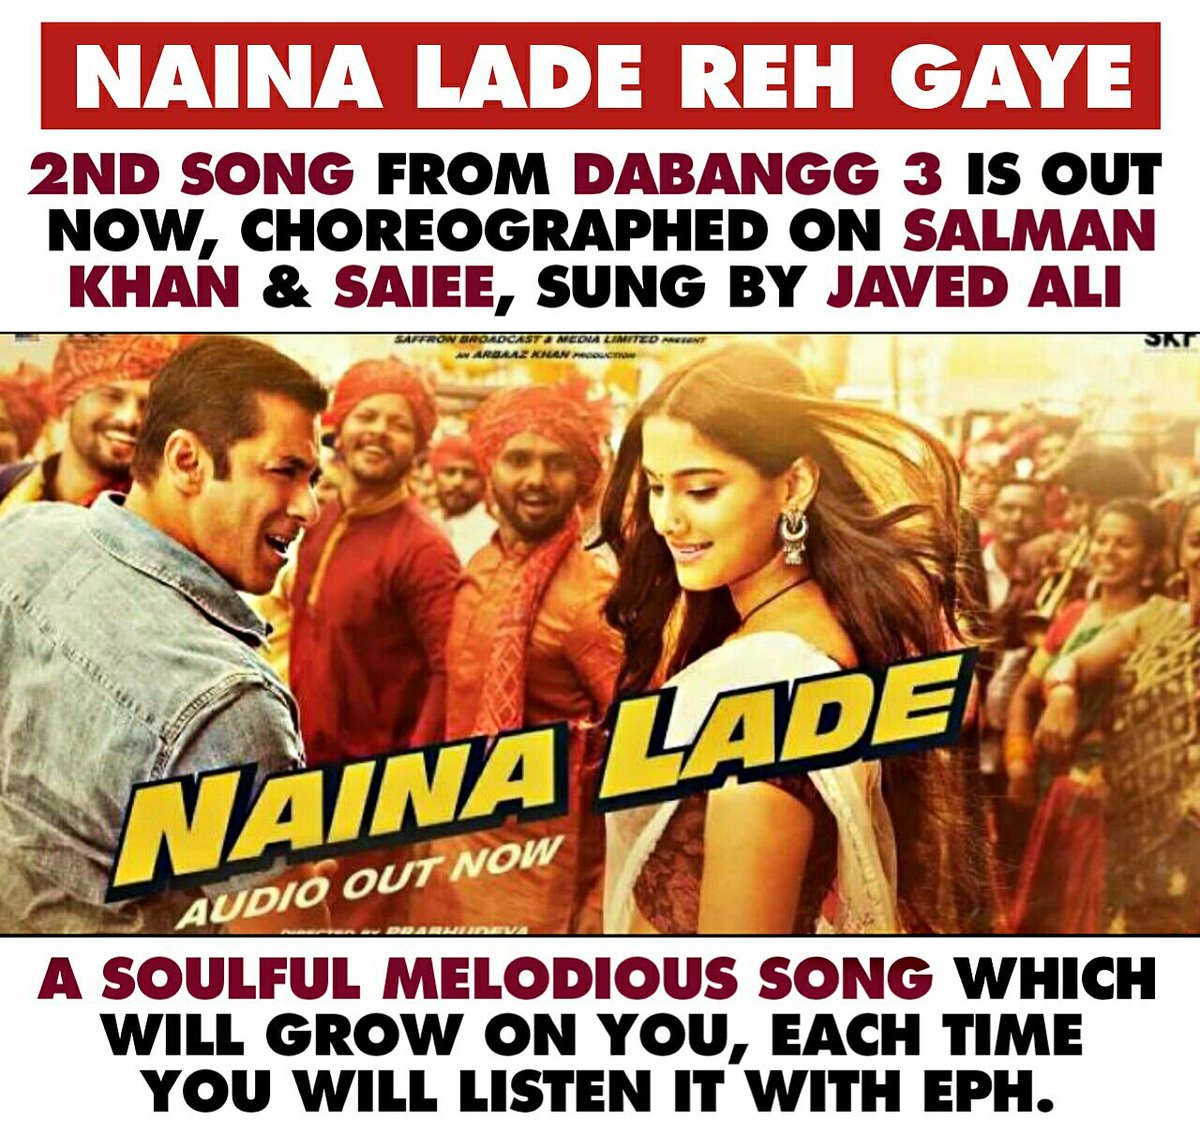 #NaineLade Song From #Dabangg3 Is Out Now On @TSeries - Youtube! 

A Soulful Track Sung By #JavedAli and Penned By #DanishSabri and Choreographed On #SalmanKhan and #SaieeManjrekar, On Repeat Mode 🎧 

🔗Link : youtu.be/aXmypJSCWdo